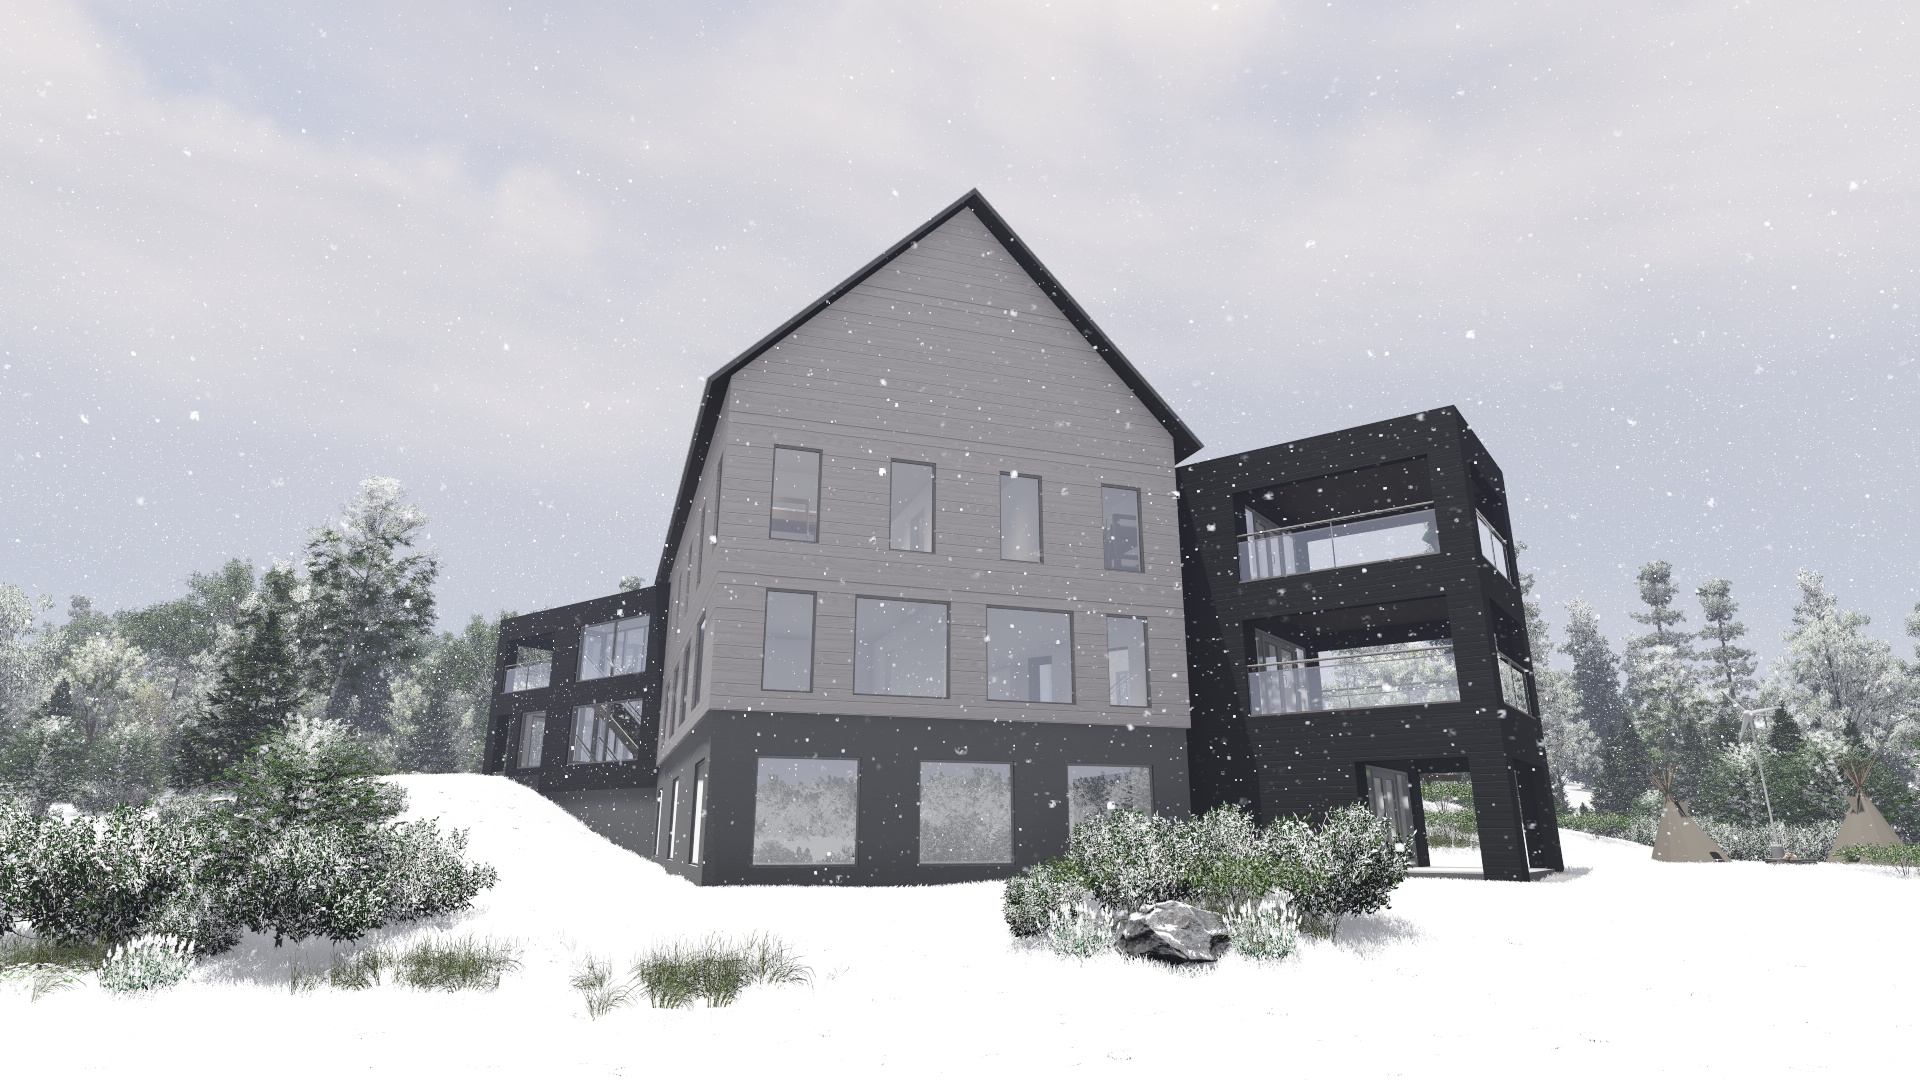 Kimbercote Accommodations Building - 002C - with snow 5.jpg